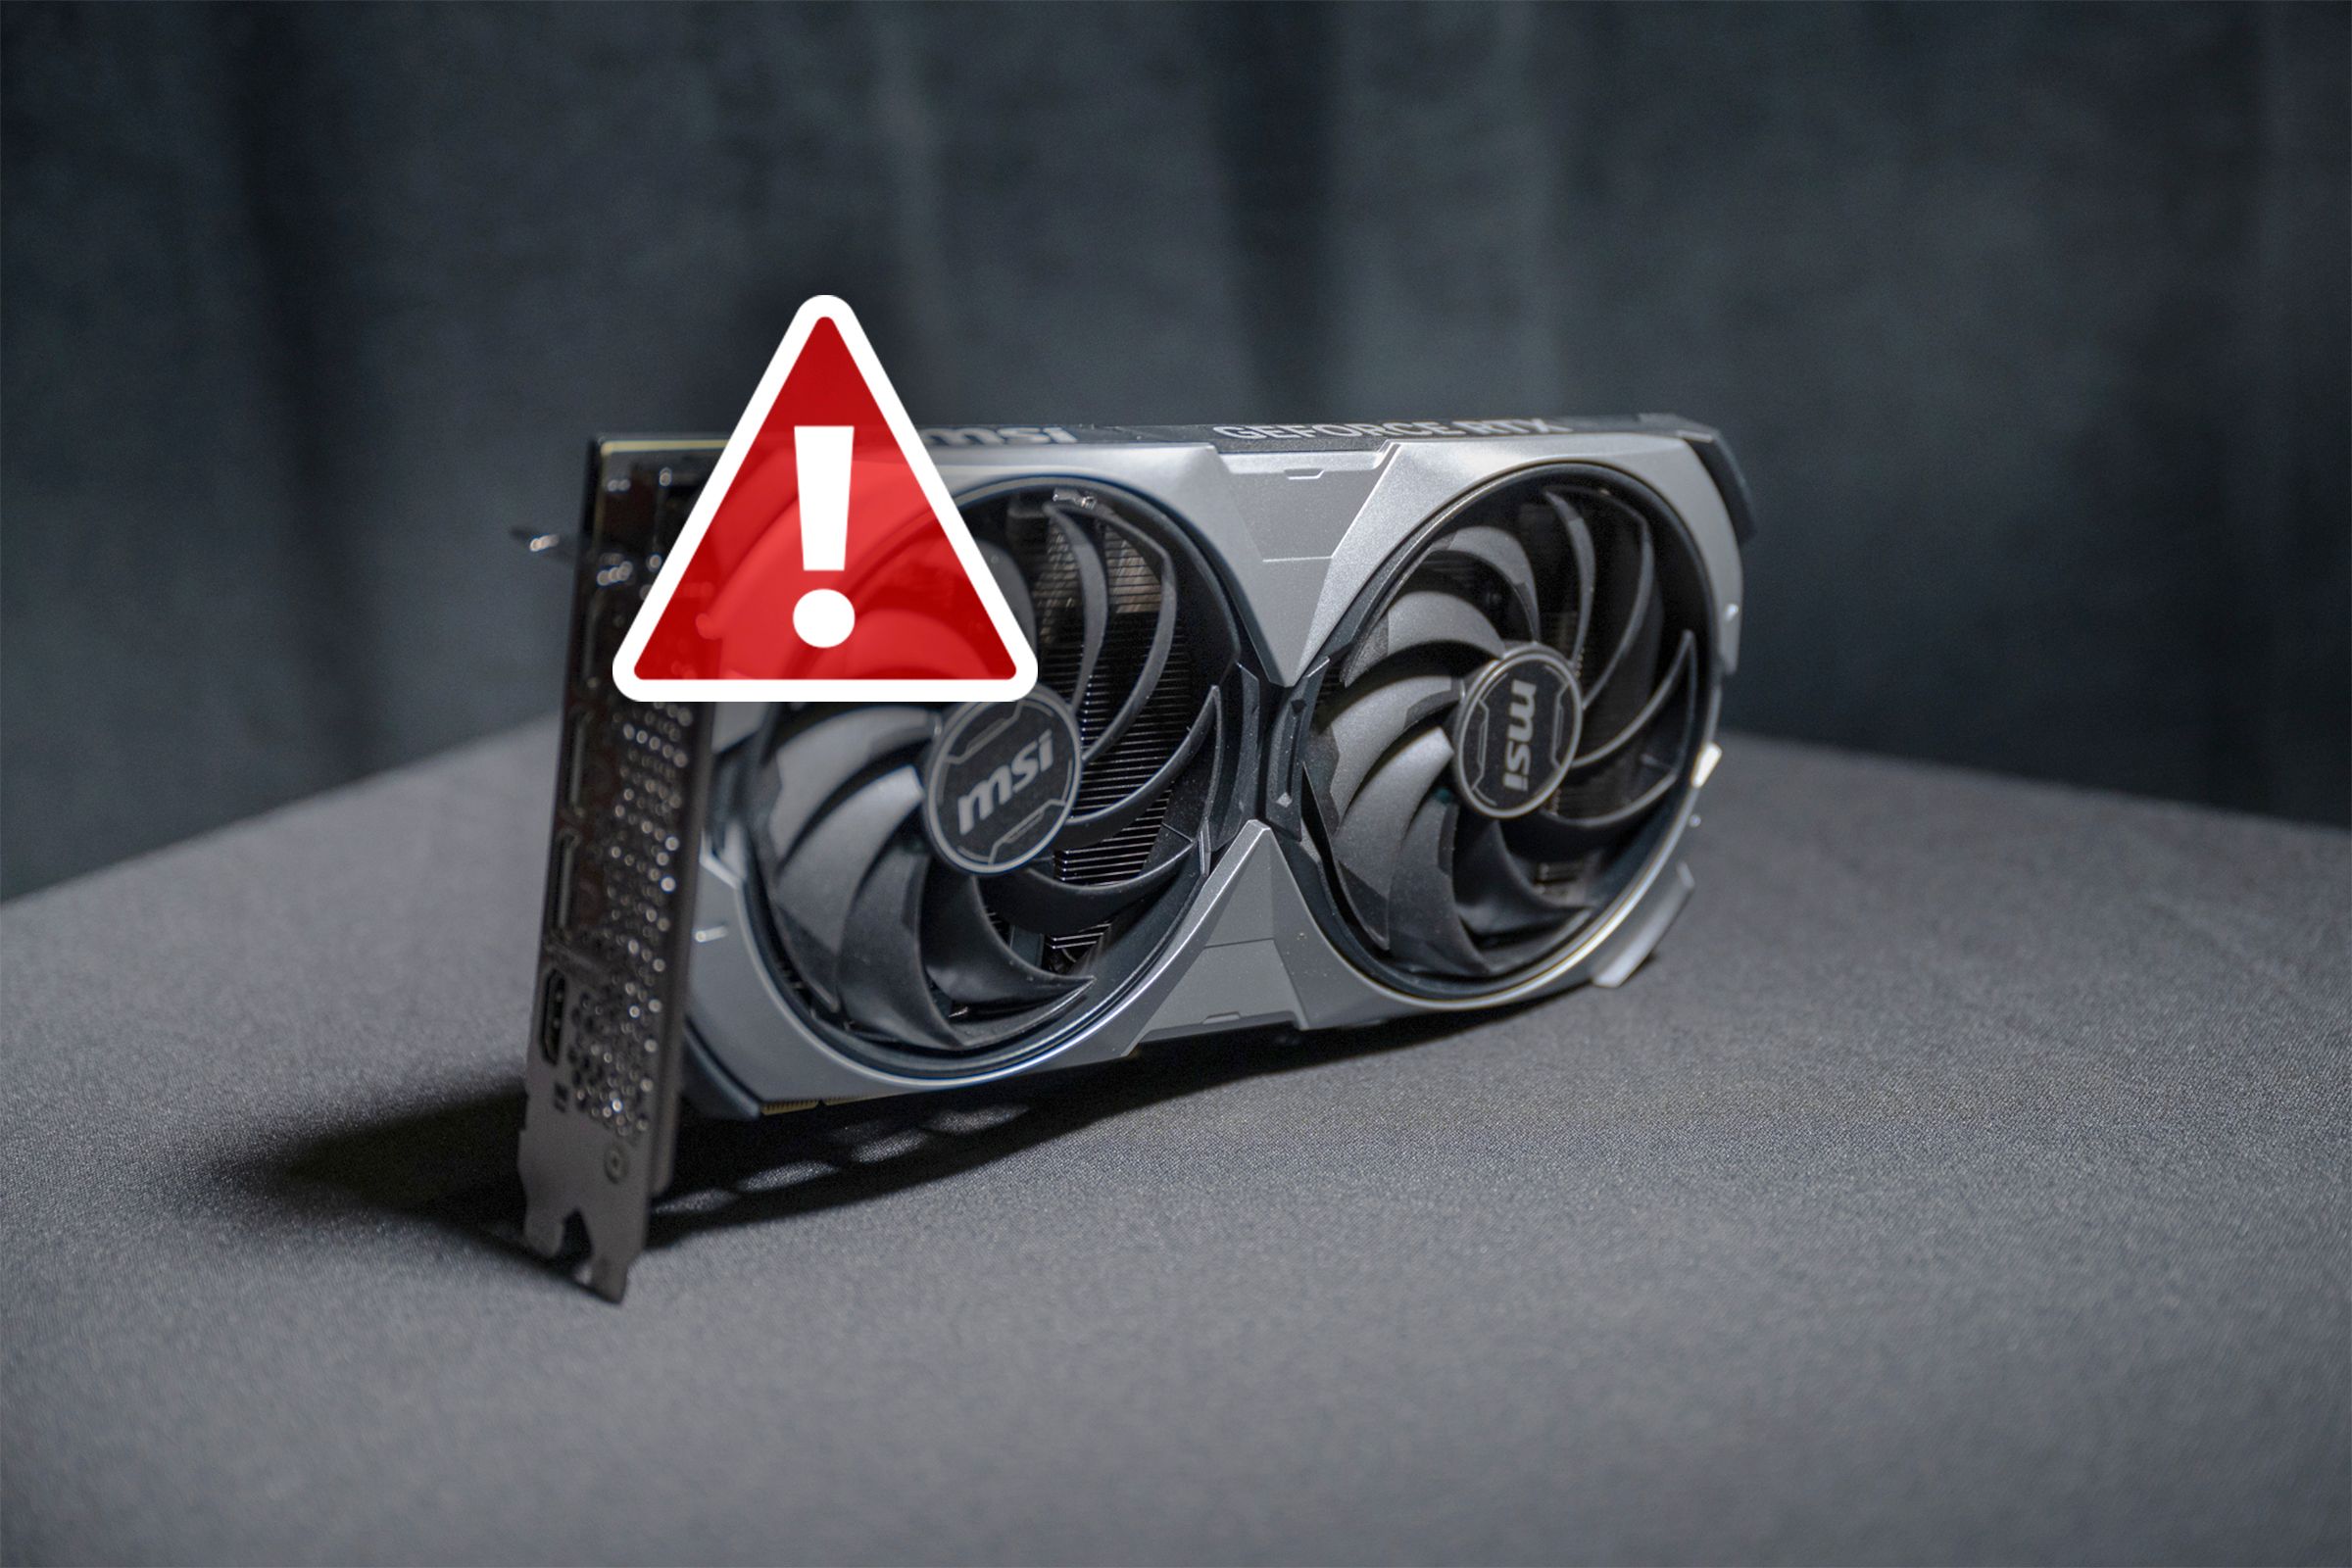 A GPU with a warning icon.